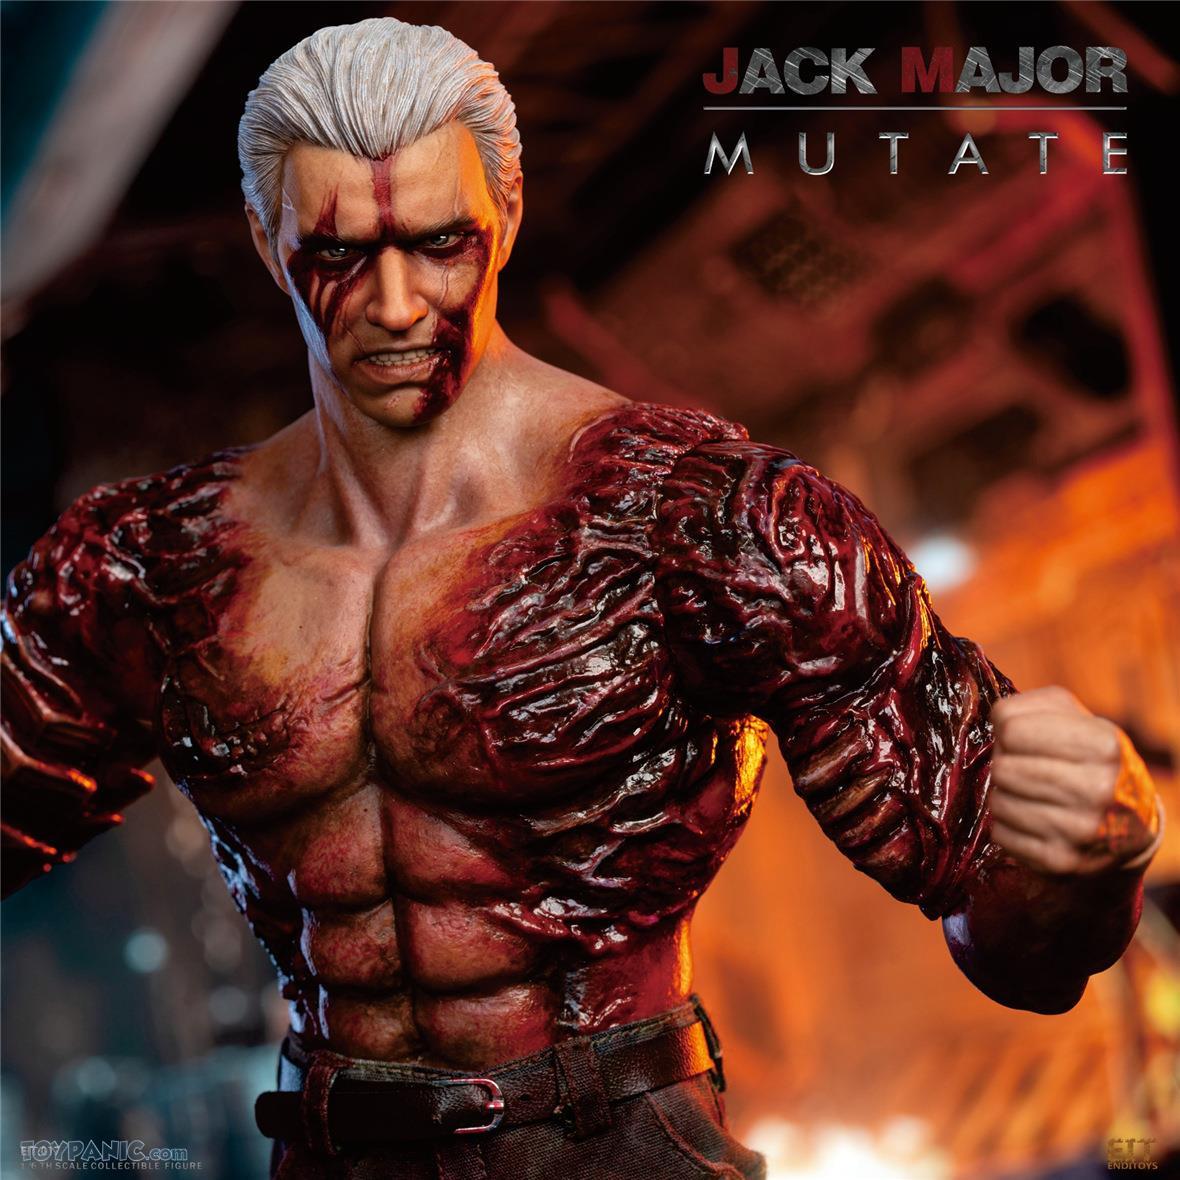 EndIToys - NEW PRODUCT:  1/6 Jack Major Mutate from End I Toys  2732024105954AM_720776